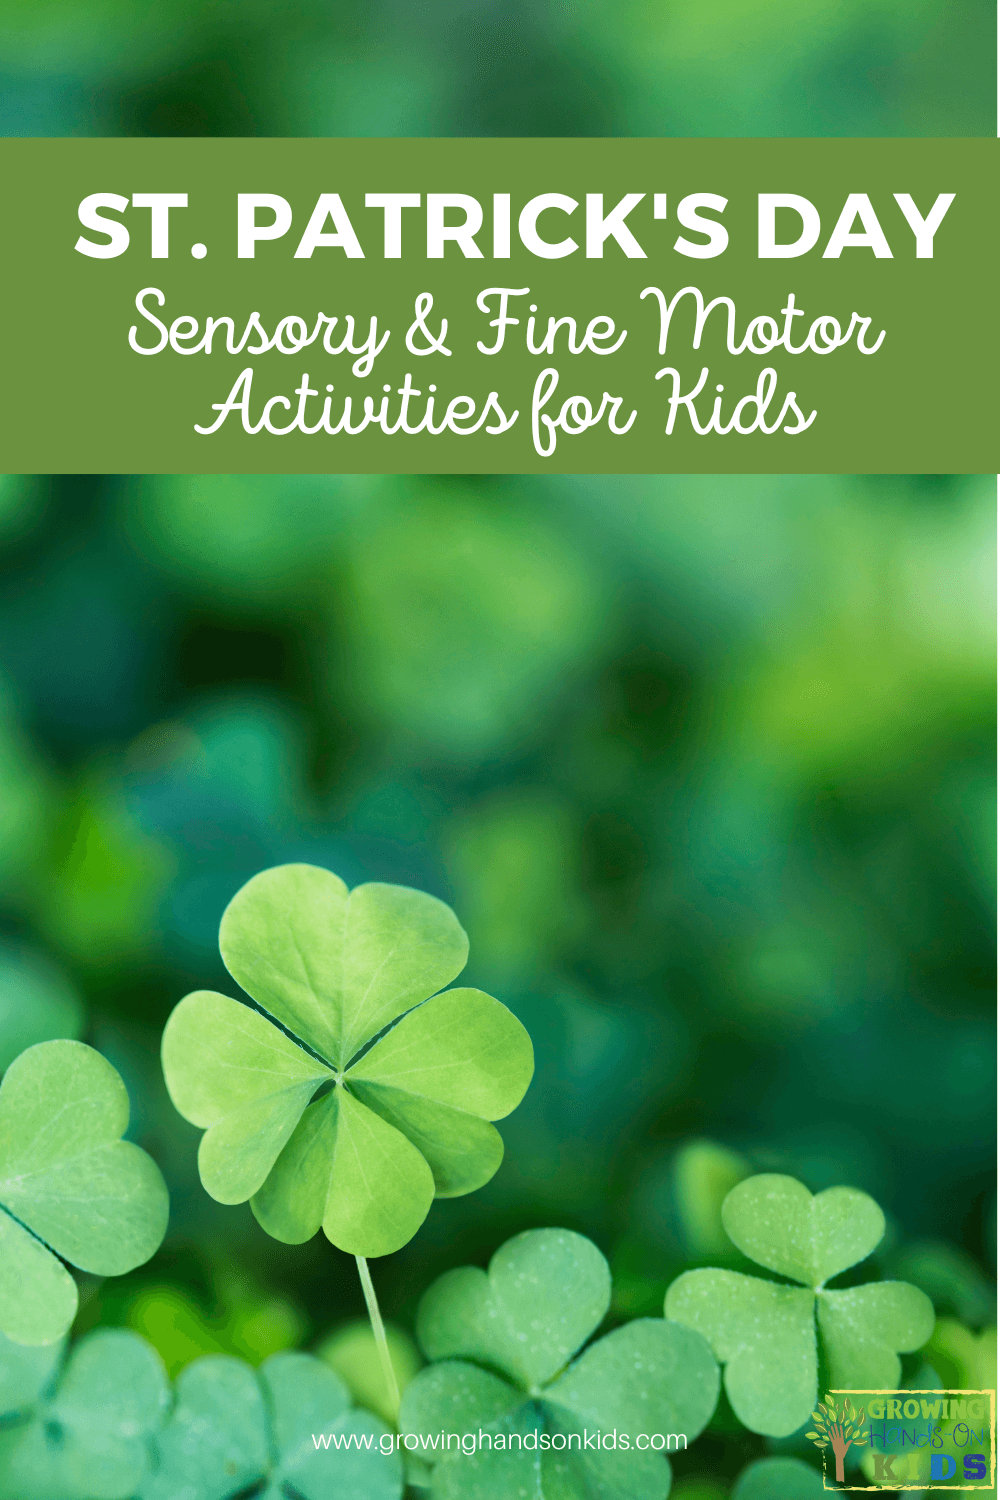 Pin on Activities for Kids